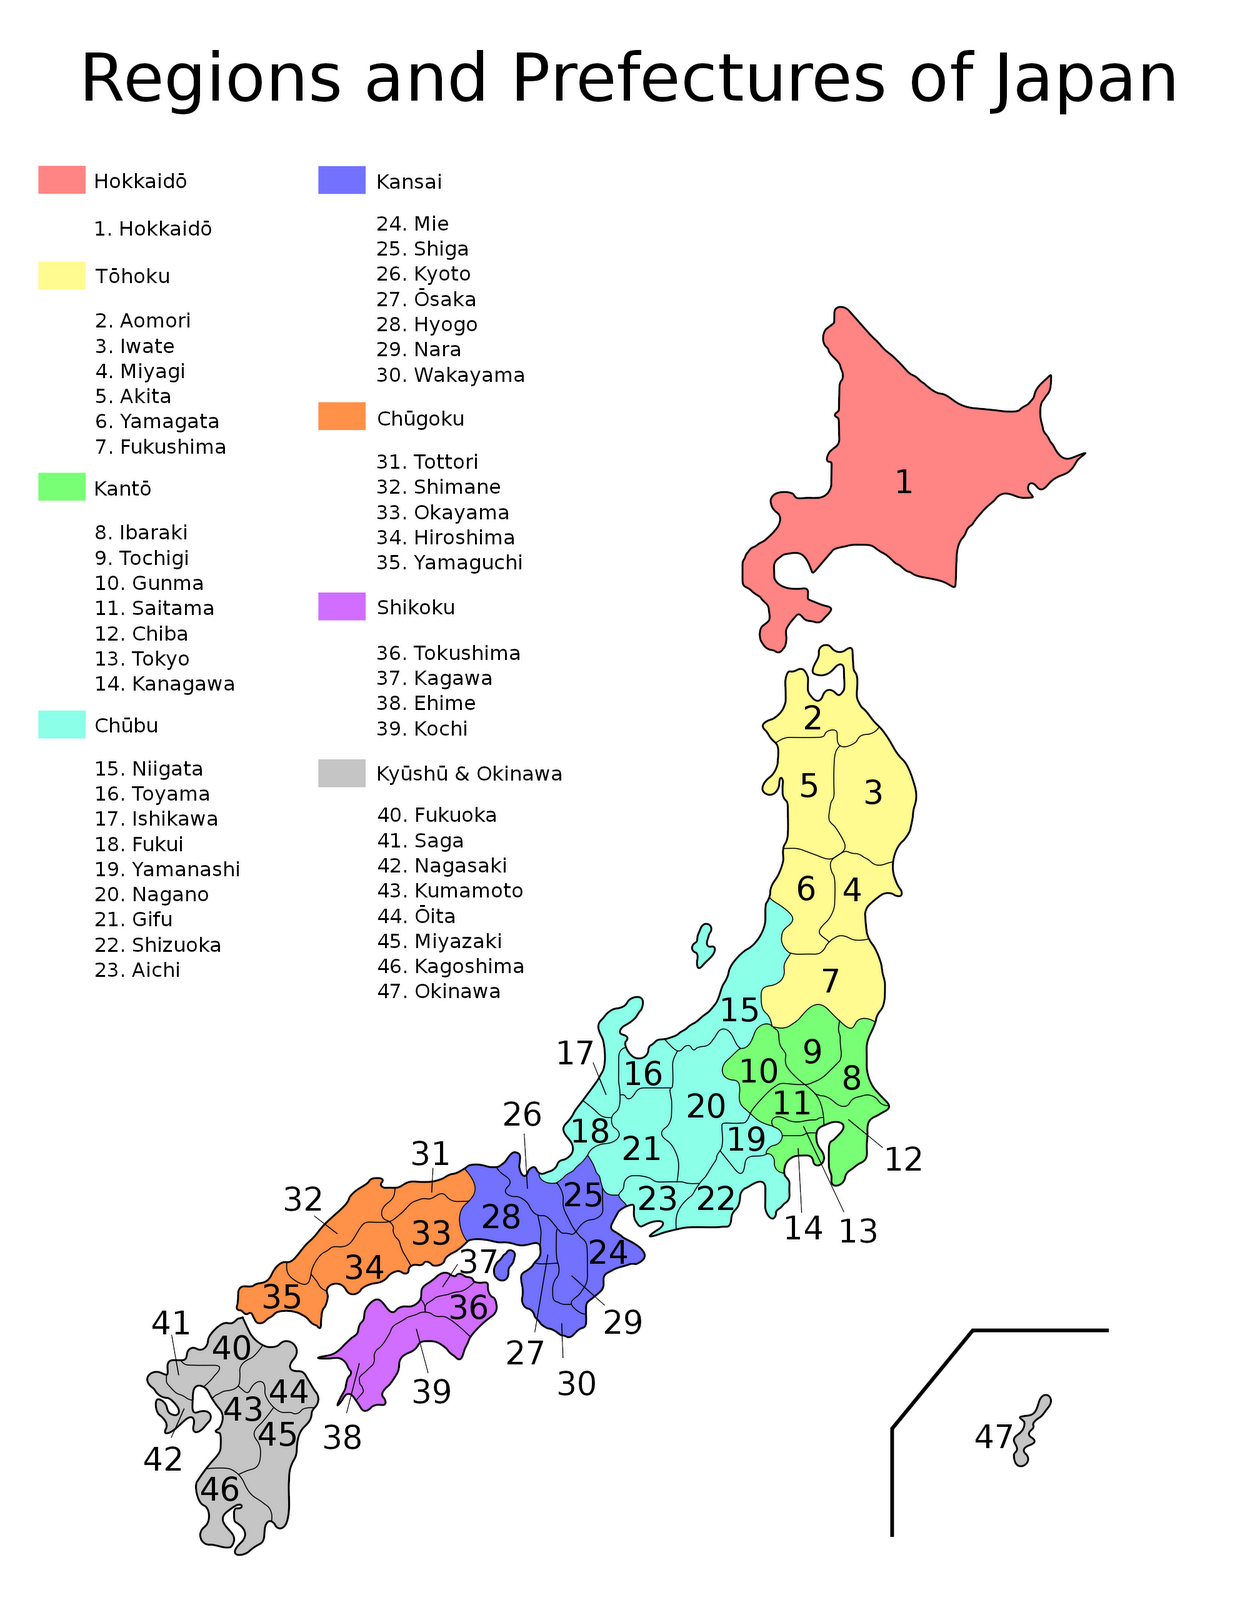 In Pursuit of Japan: An Overview of the Prefectures of Japan